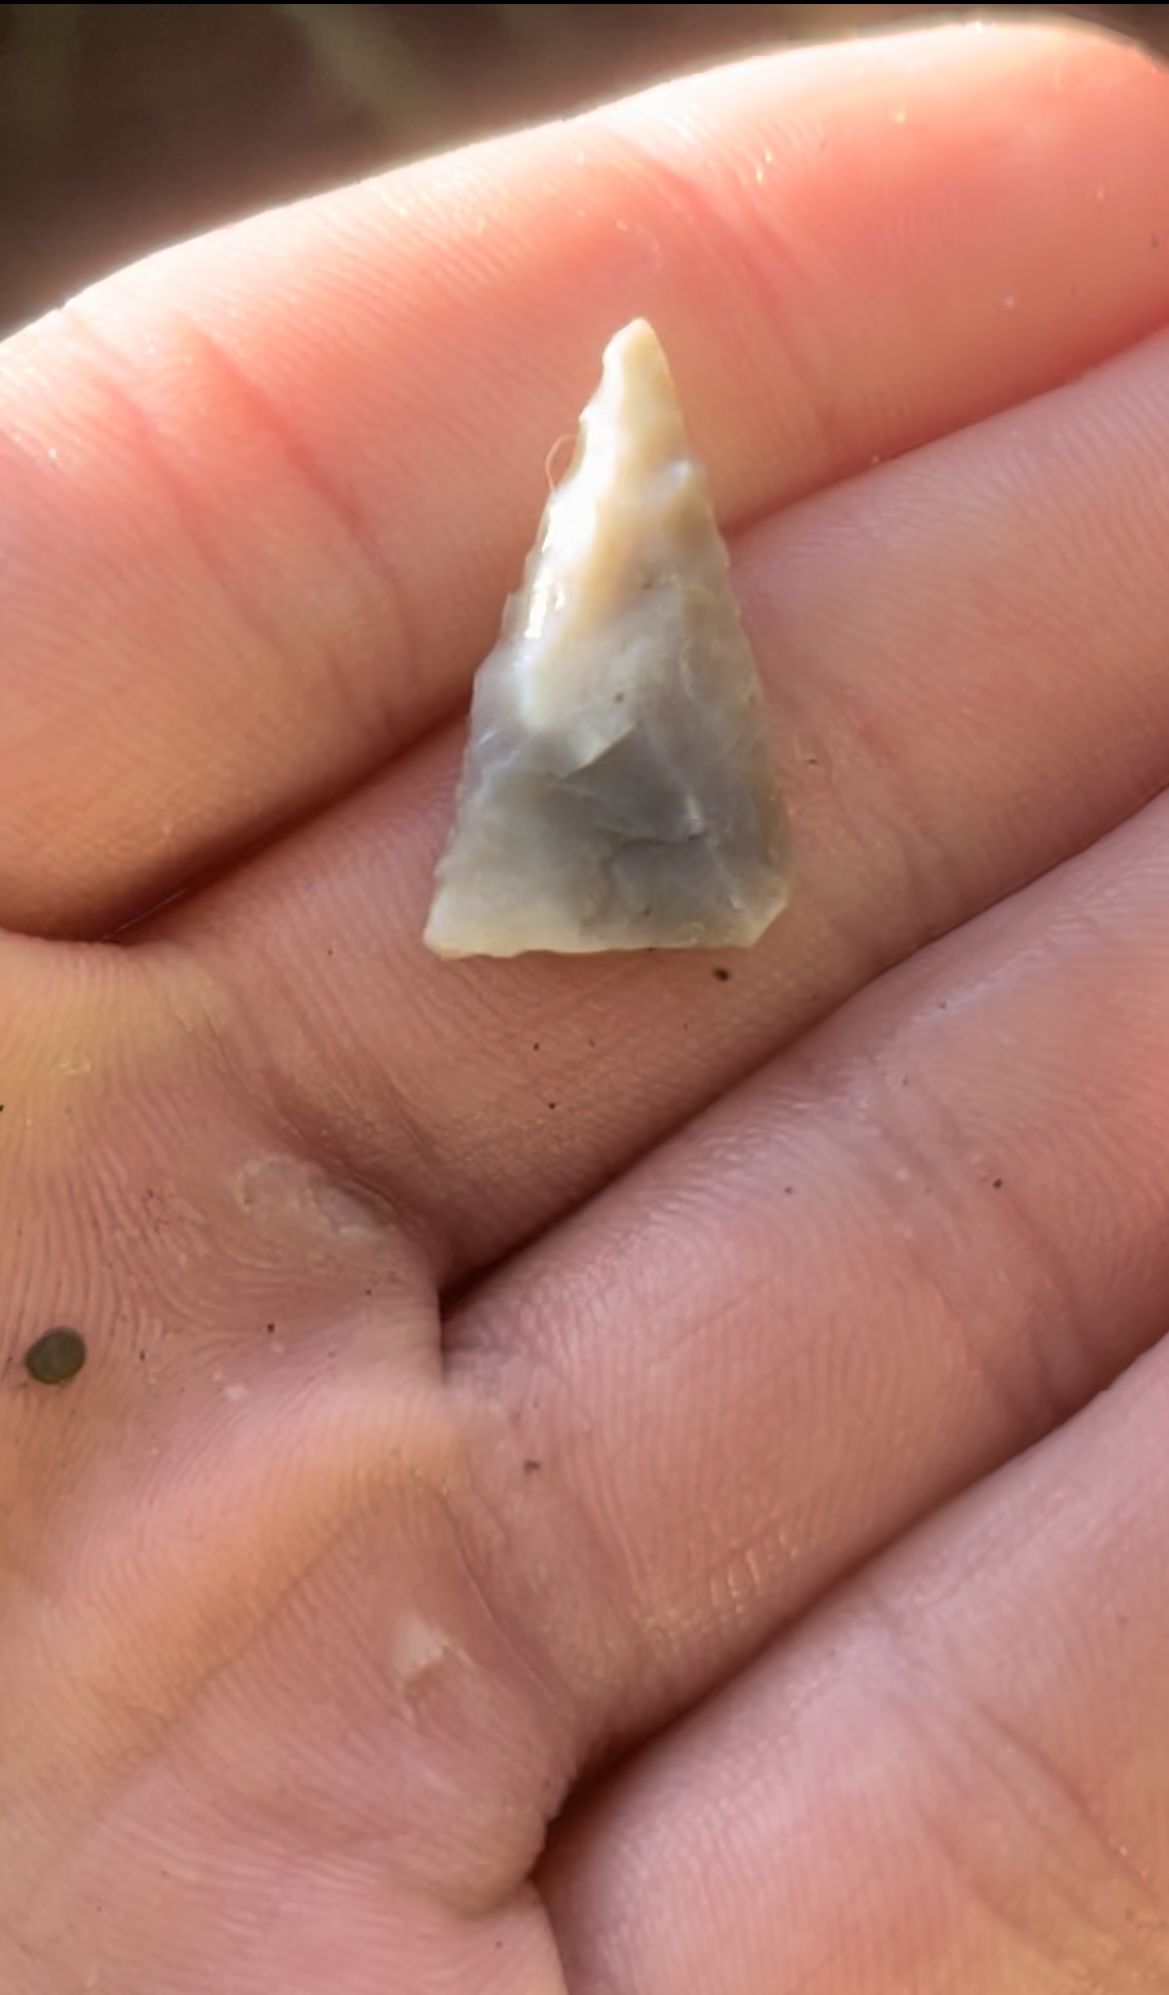 Nice pinellas point I found in north Florida!